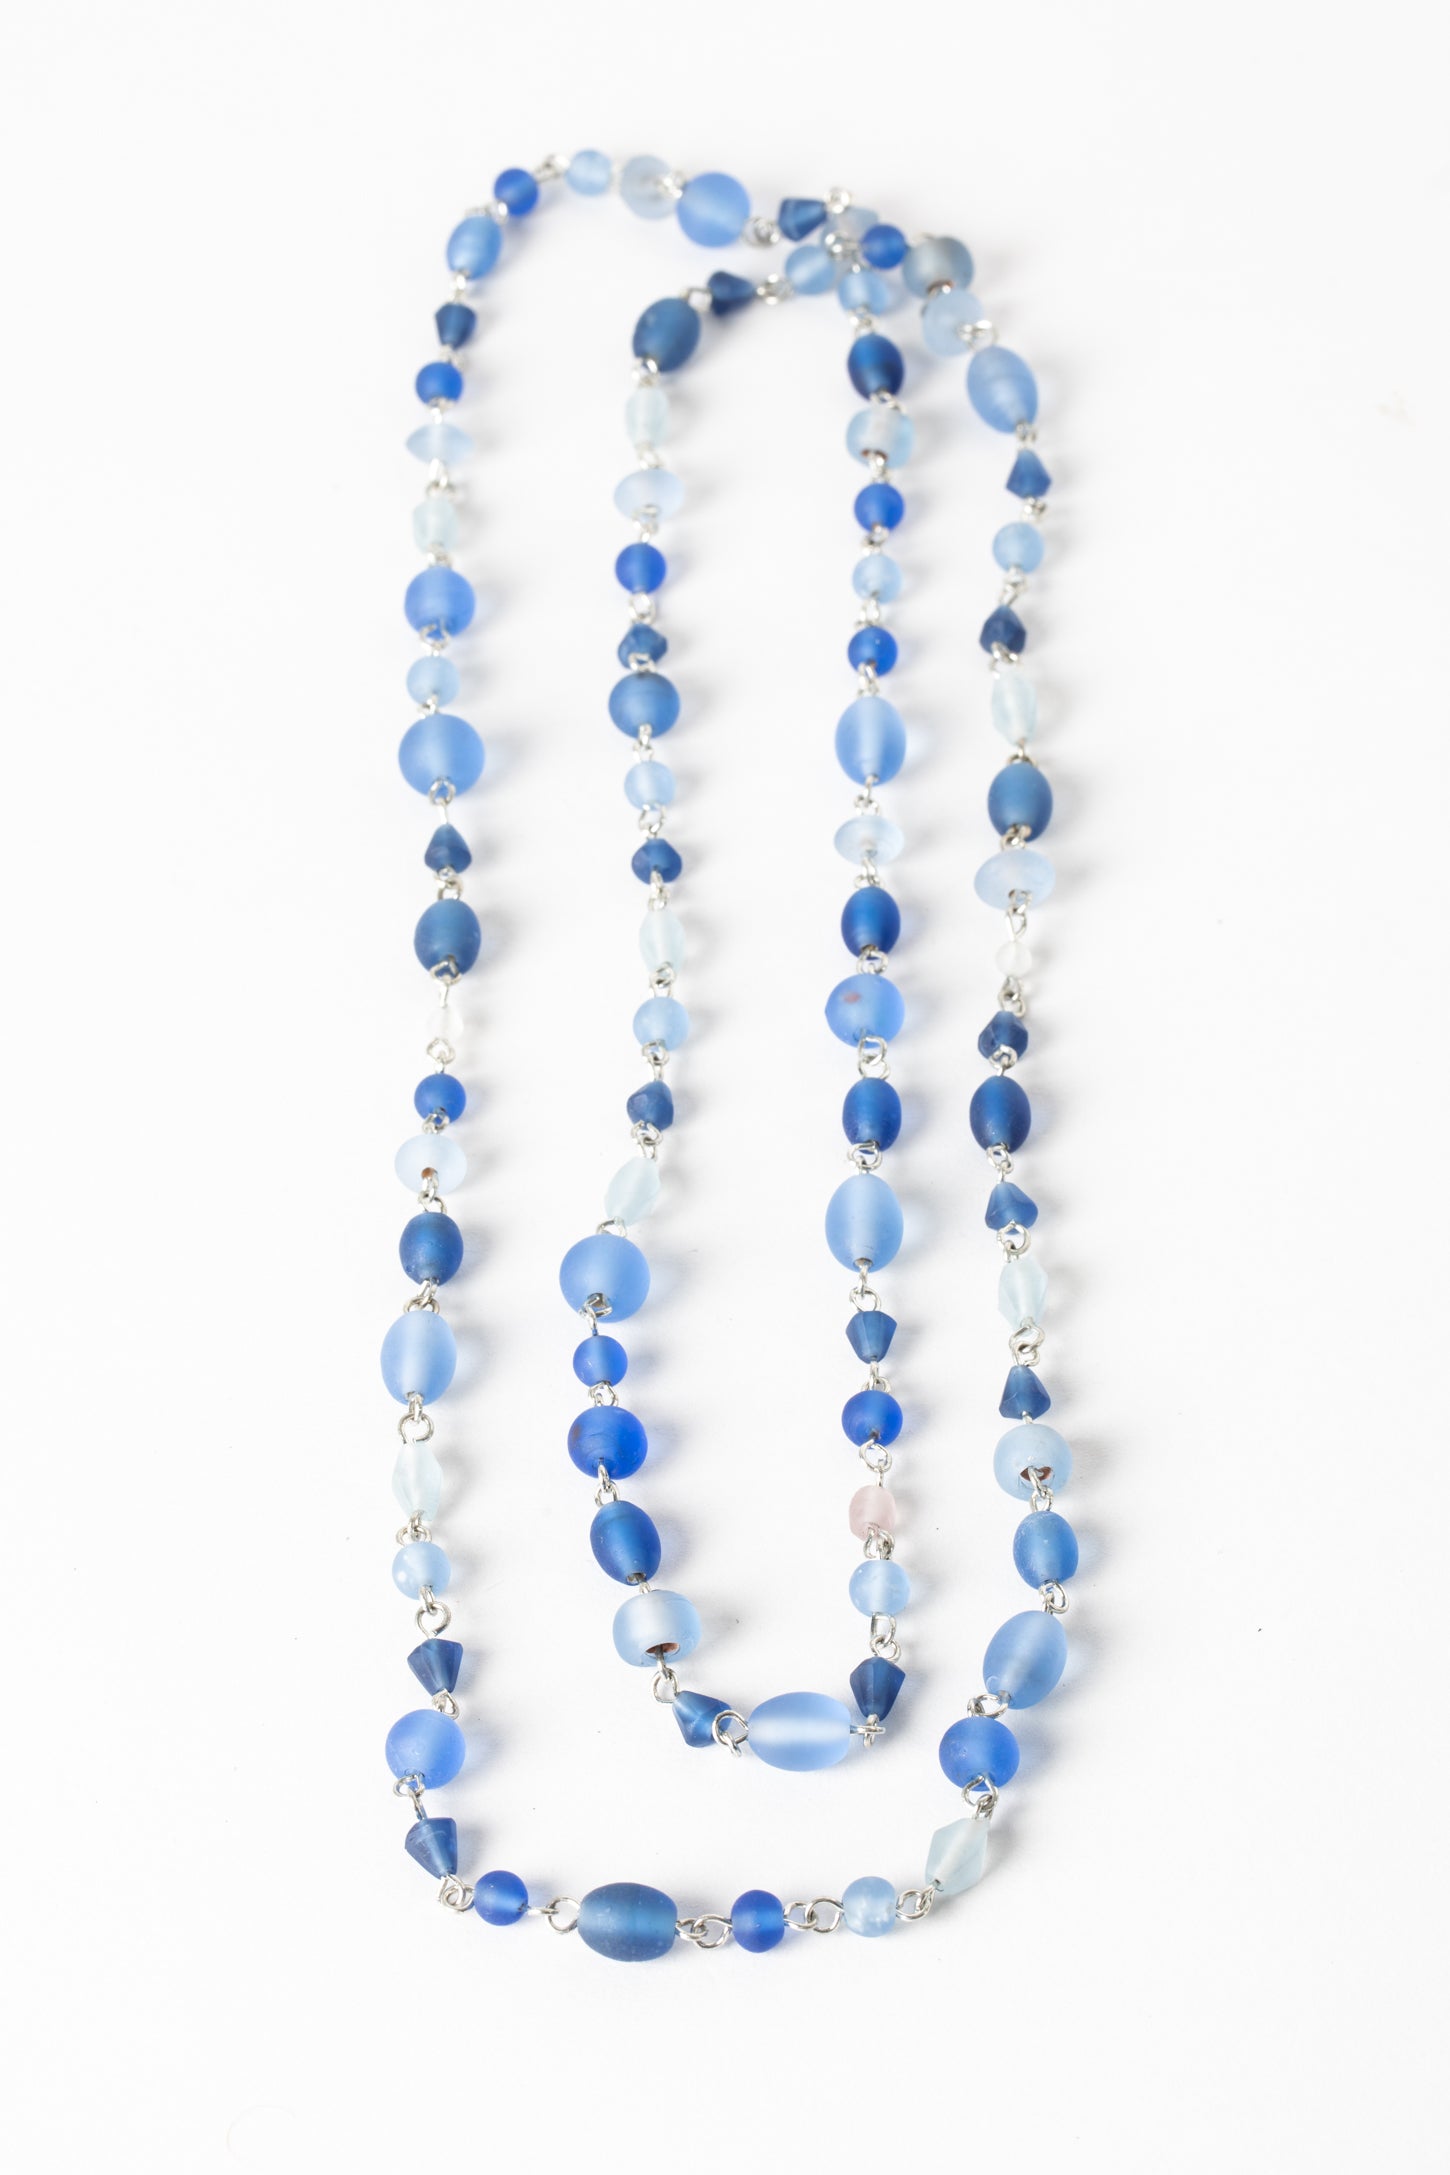 Indelible Melody Frosted Glass Bead Necklace